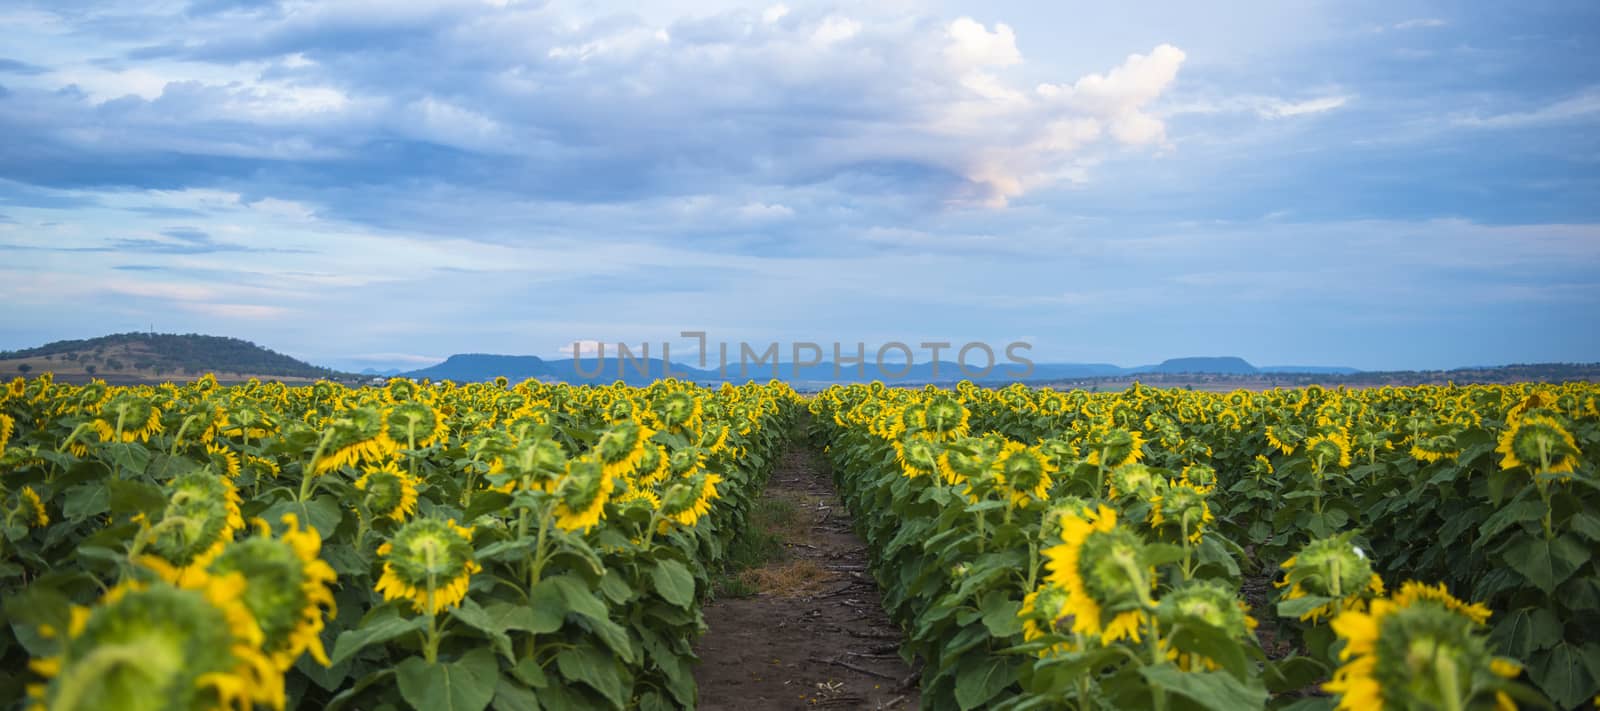 Sunflowers amongst a field in the afternoon in Queensland, Australia.